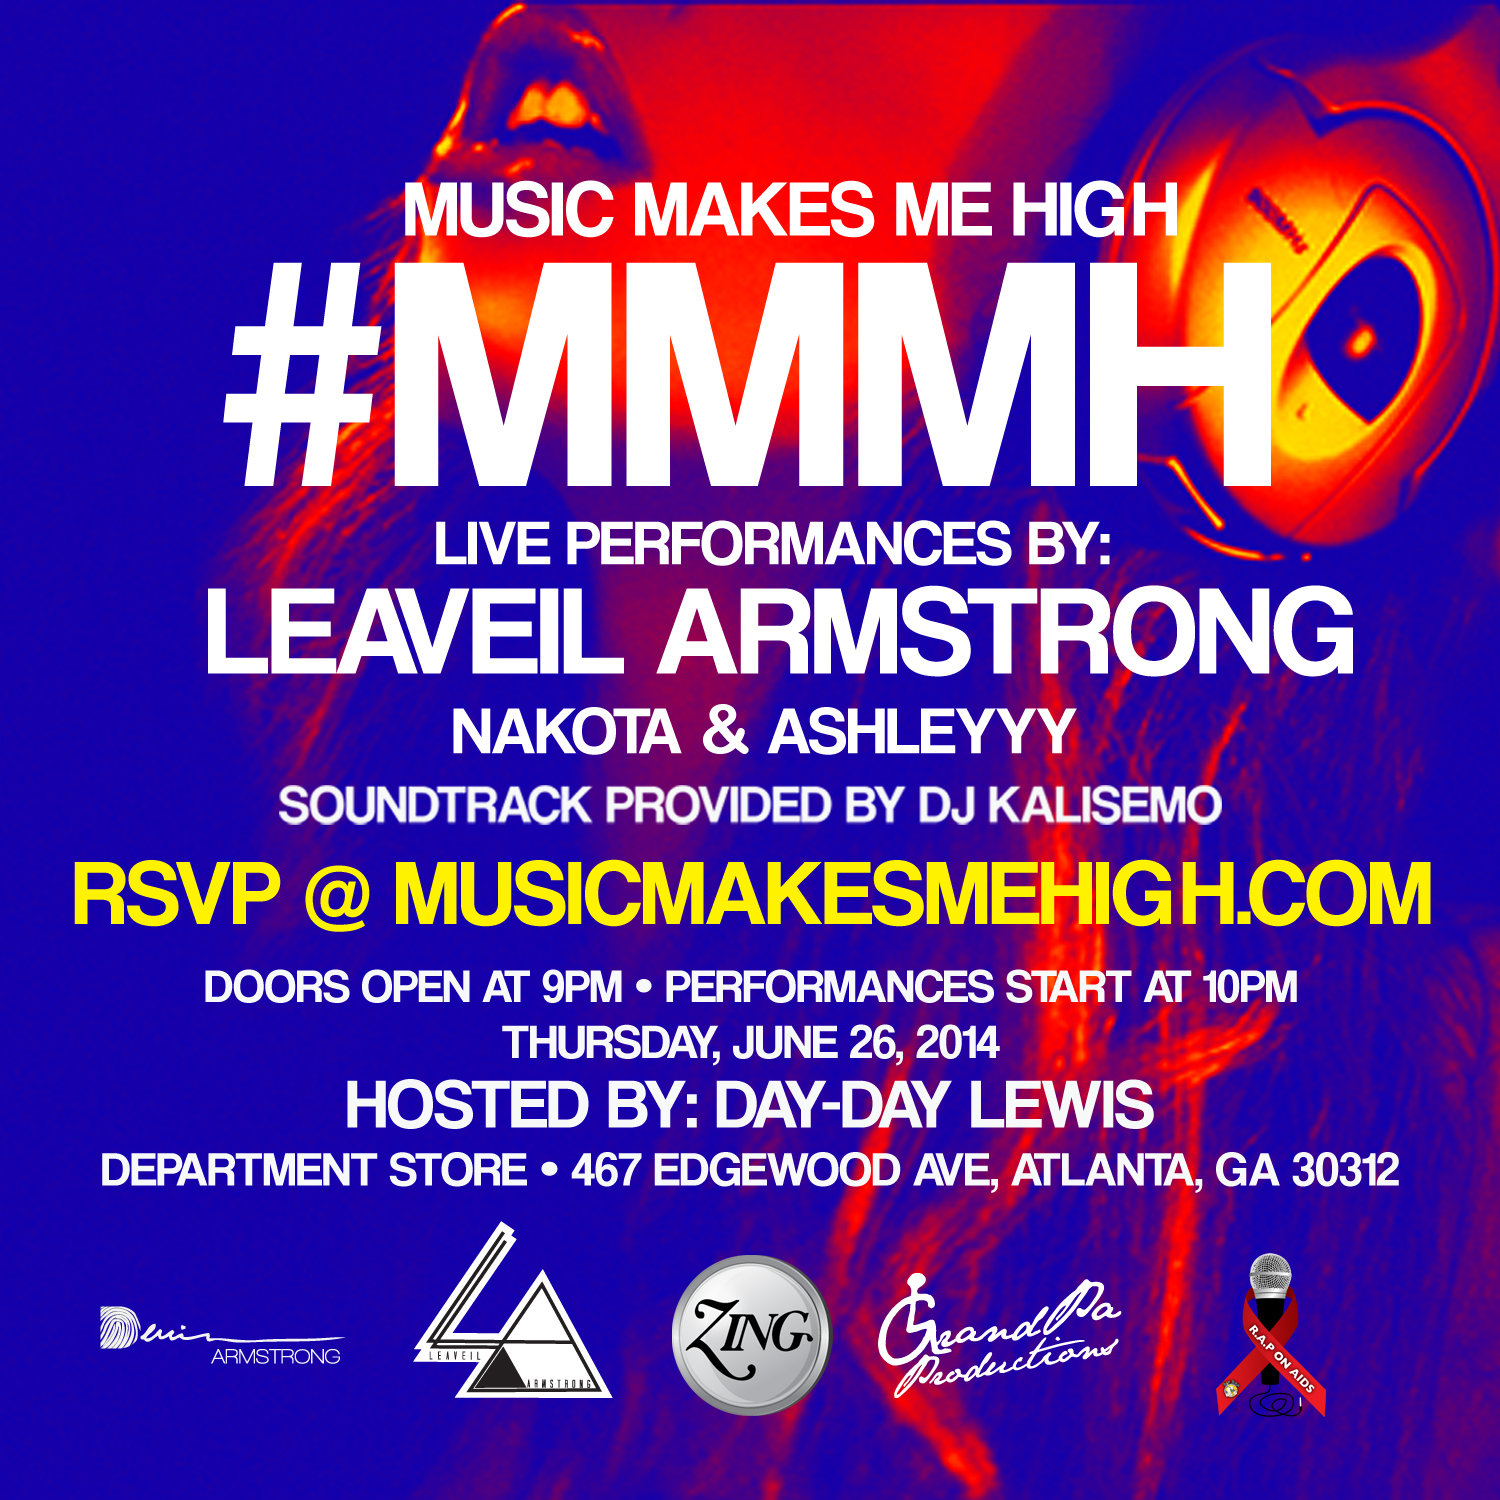 AshleYYY – Performing Live at The “Music Makes Me High” Event